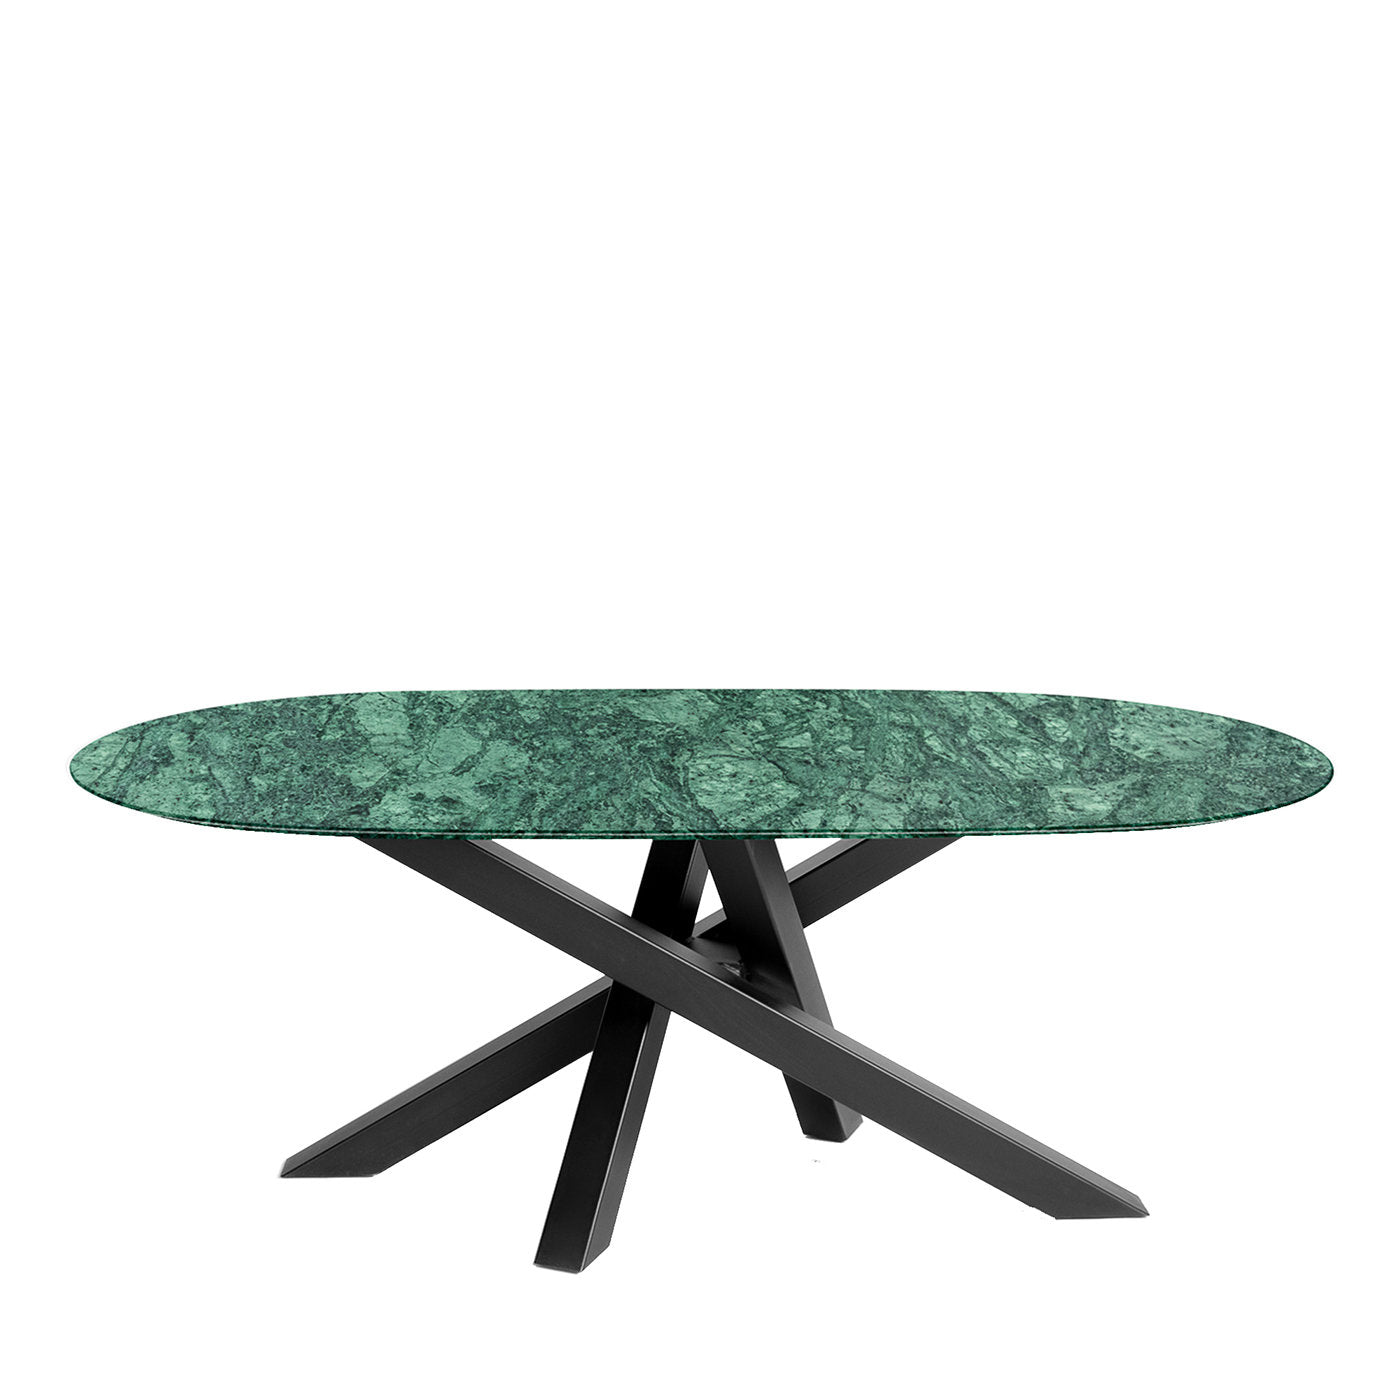 Komodo Green Imperiale Dining Table - Main view